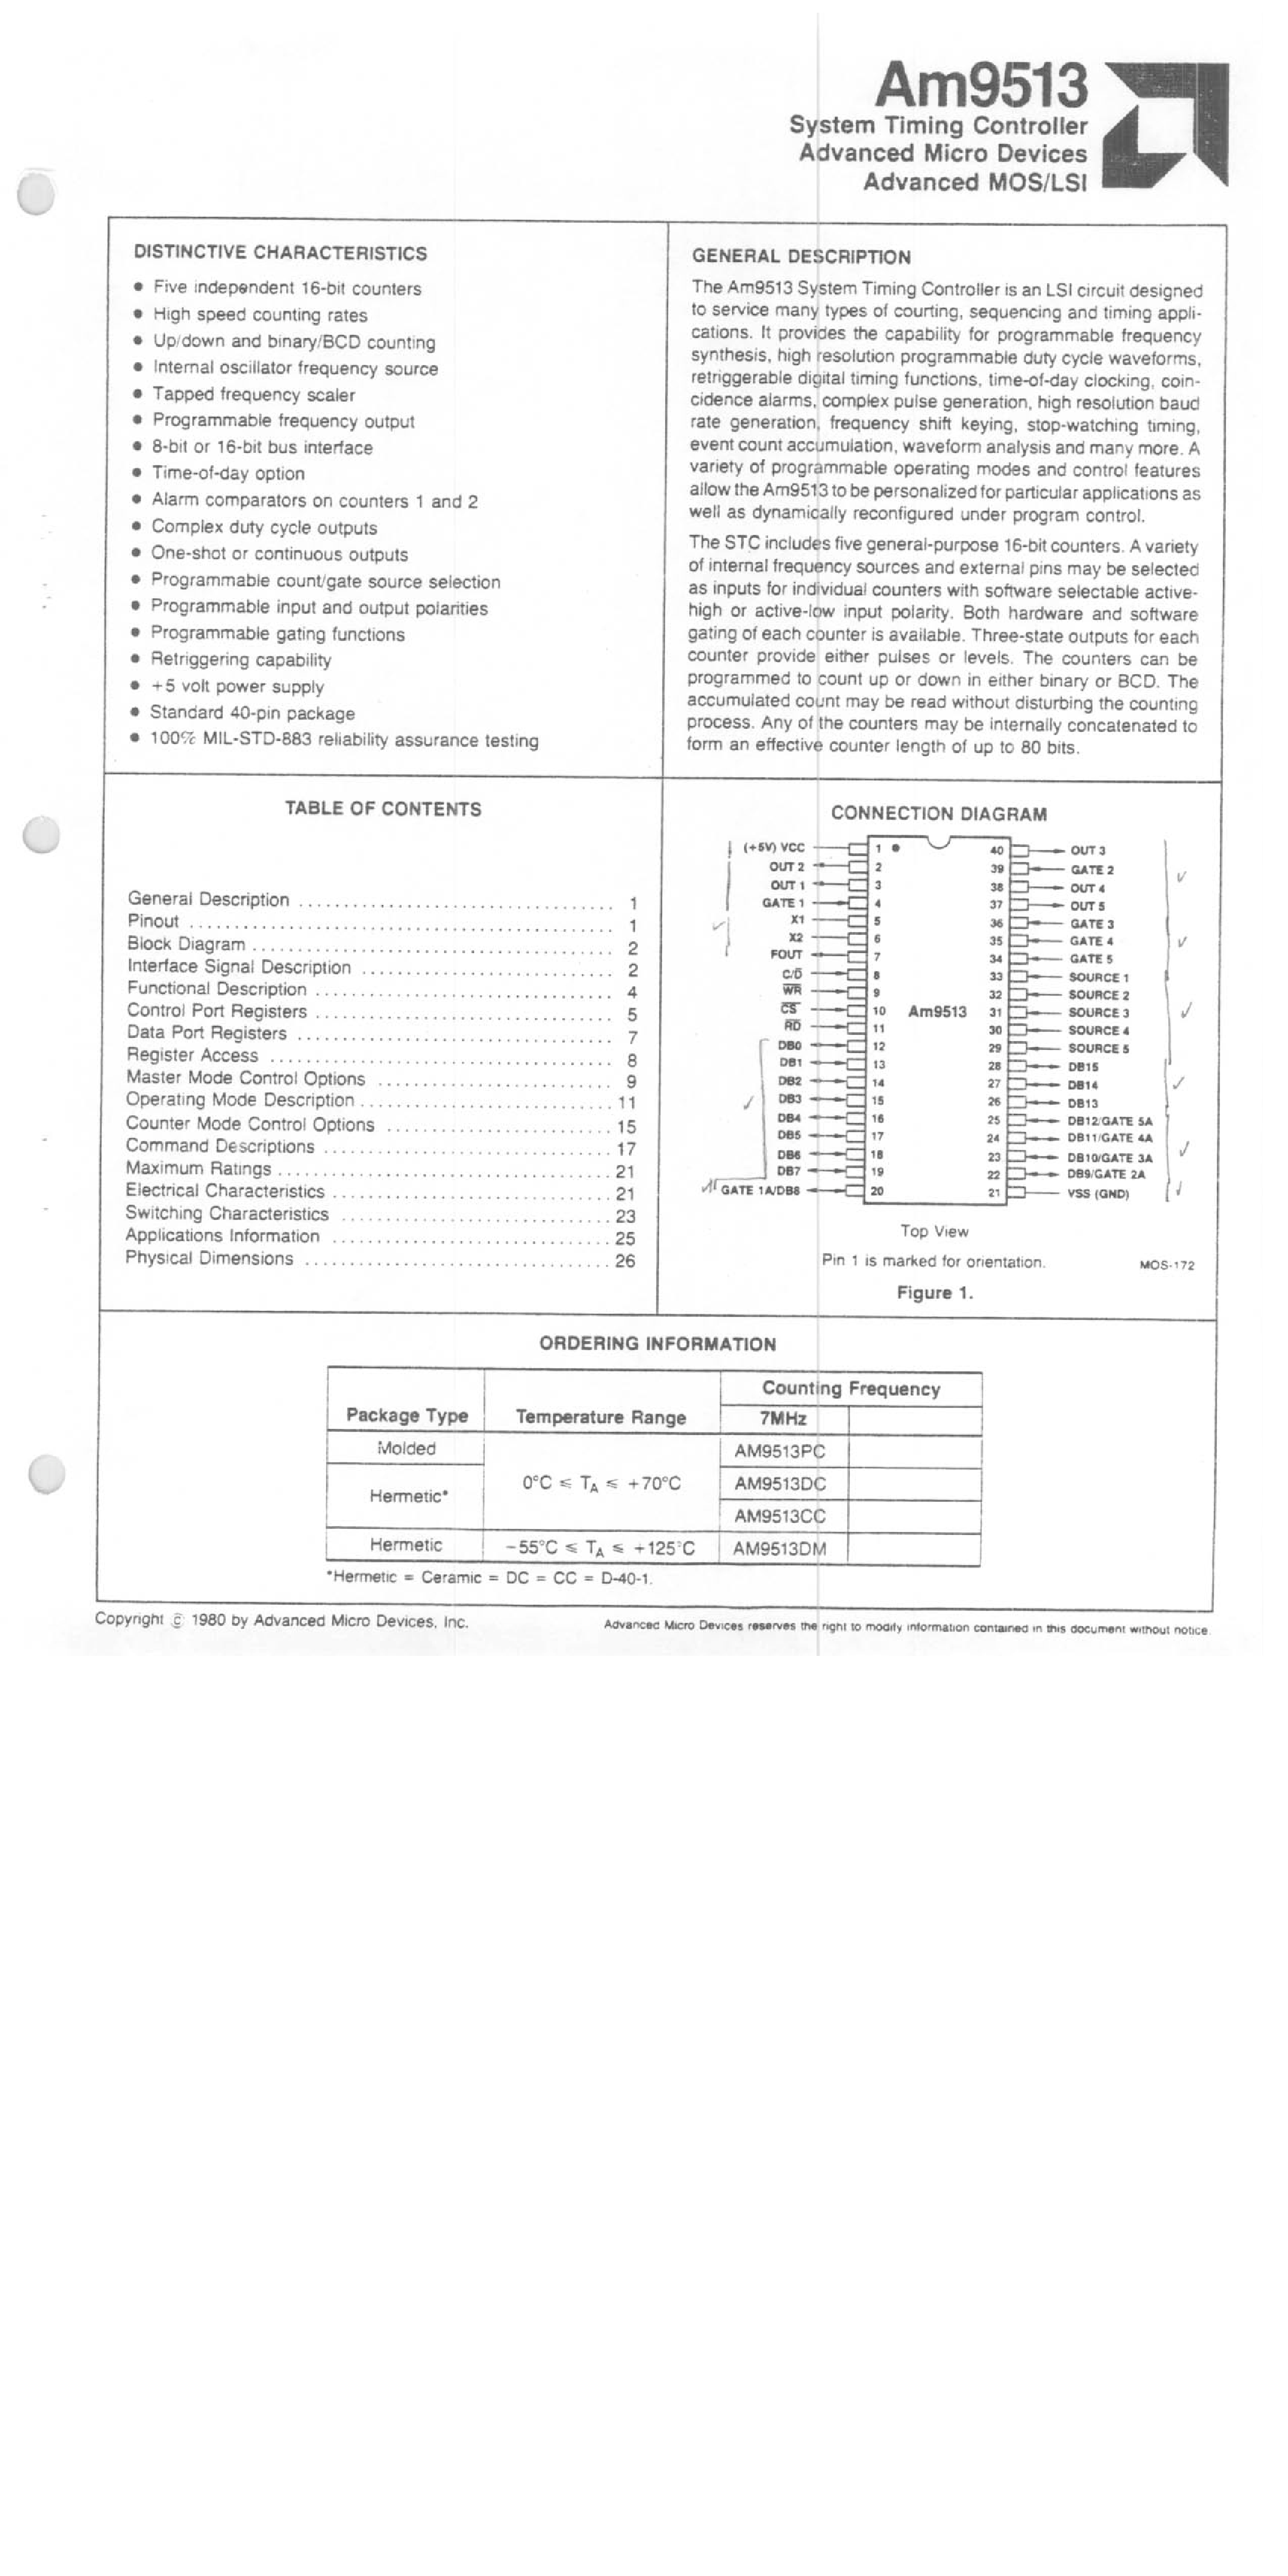 Datasheet AM9513 - System Timing Controller Advanced MOS/LSI page 1